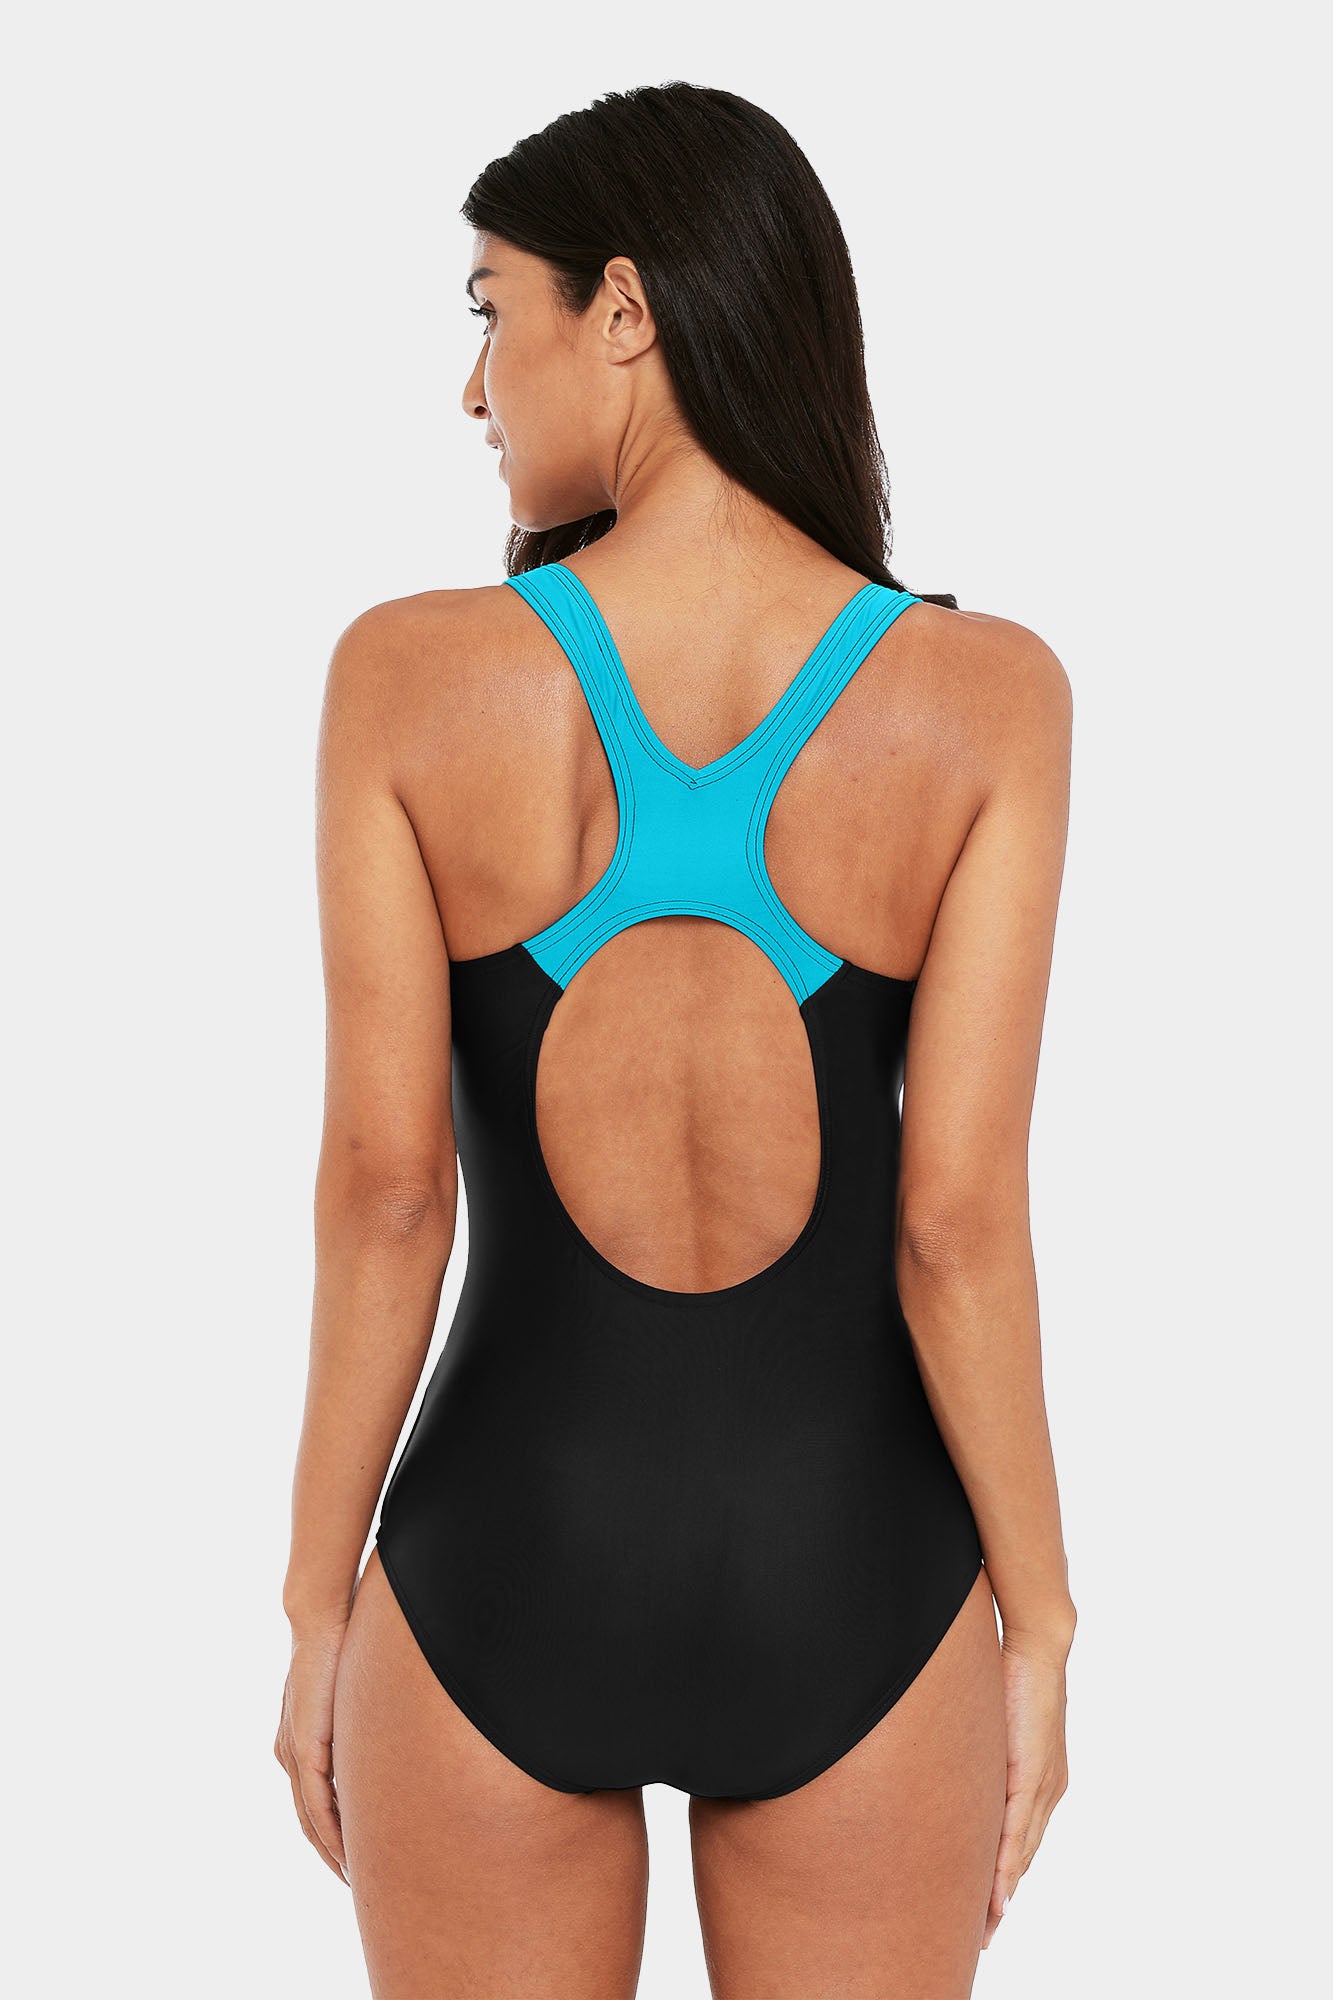 Attraco Turquoise Women's Colorblock Slimming One Piece Swimsuit-Attraco | Fashion Outdoor Clothing